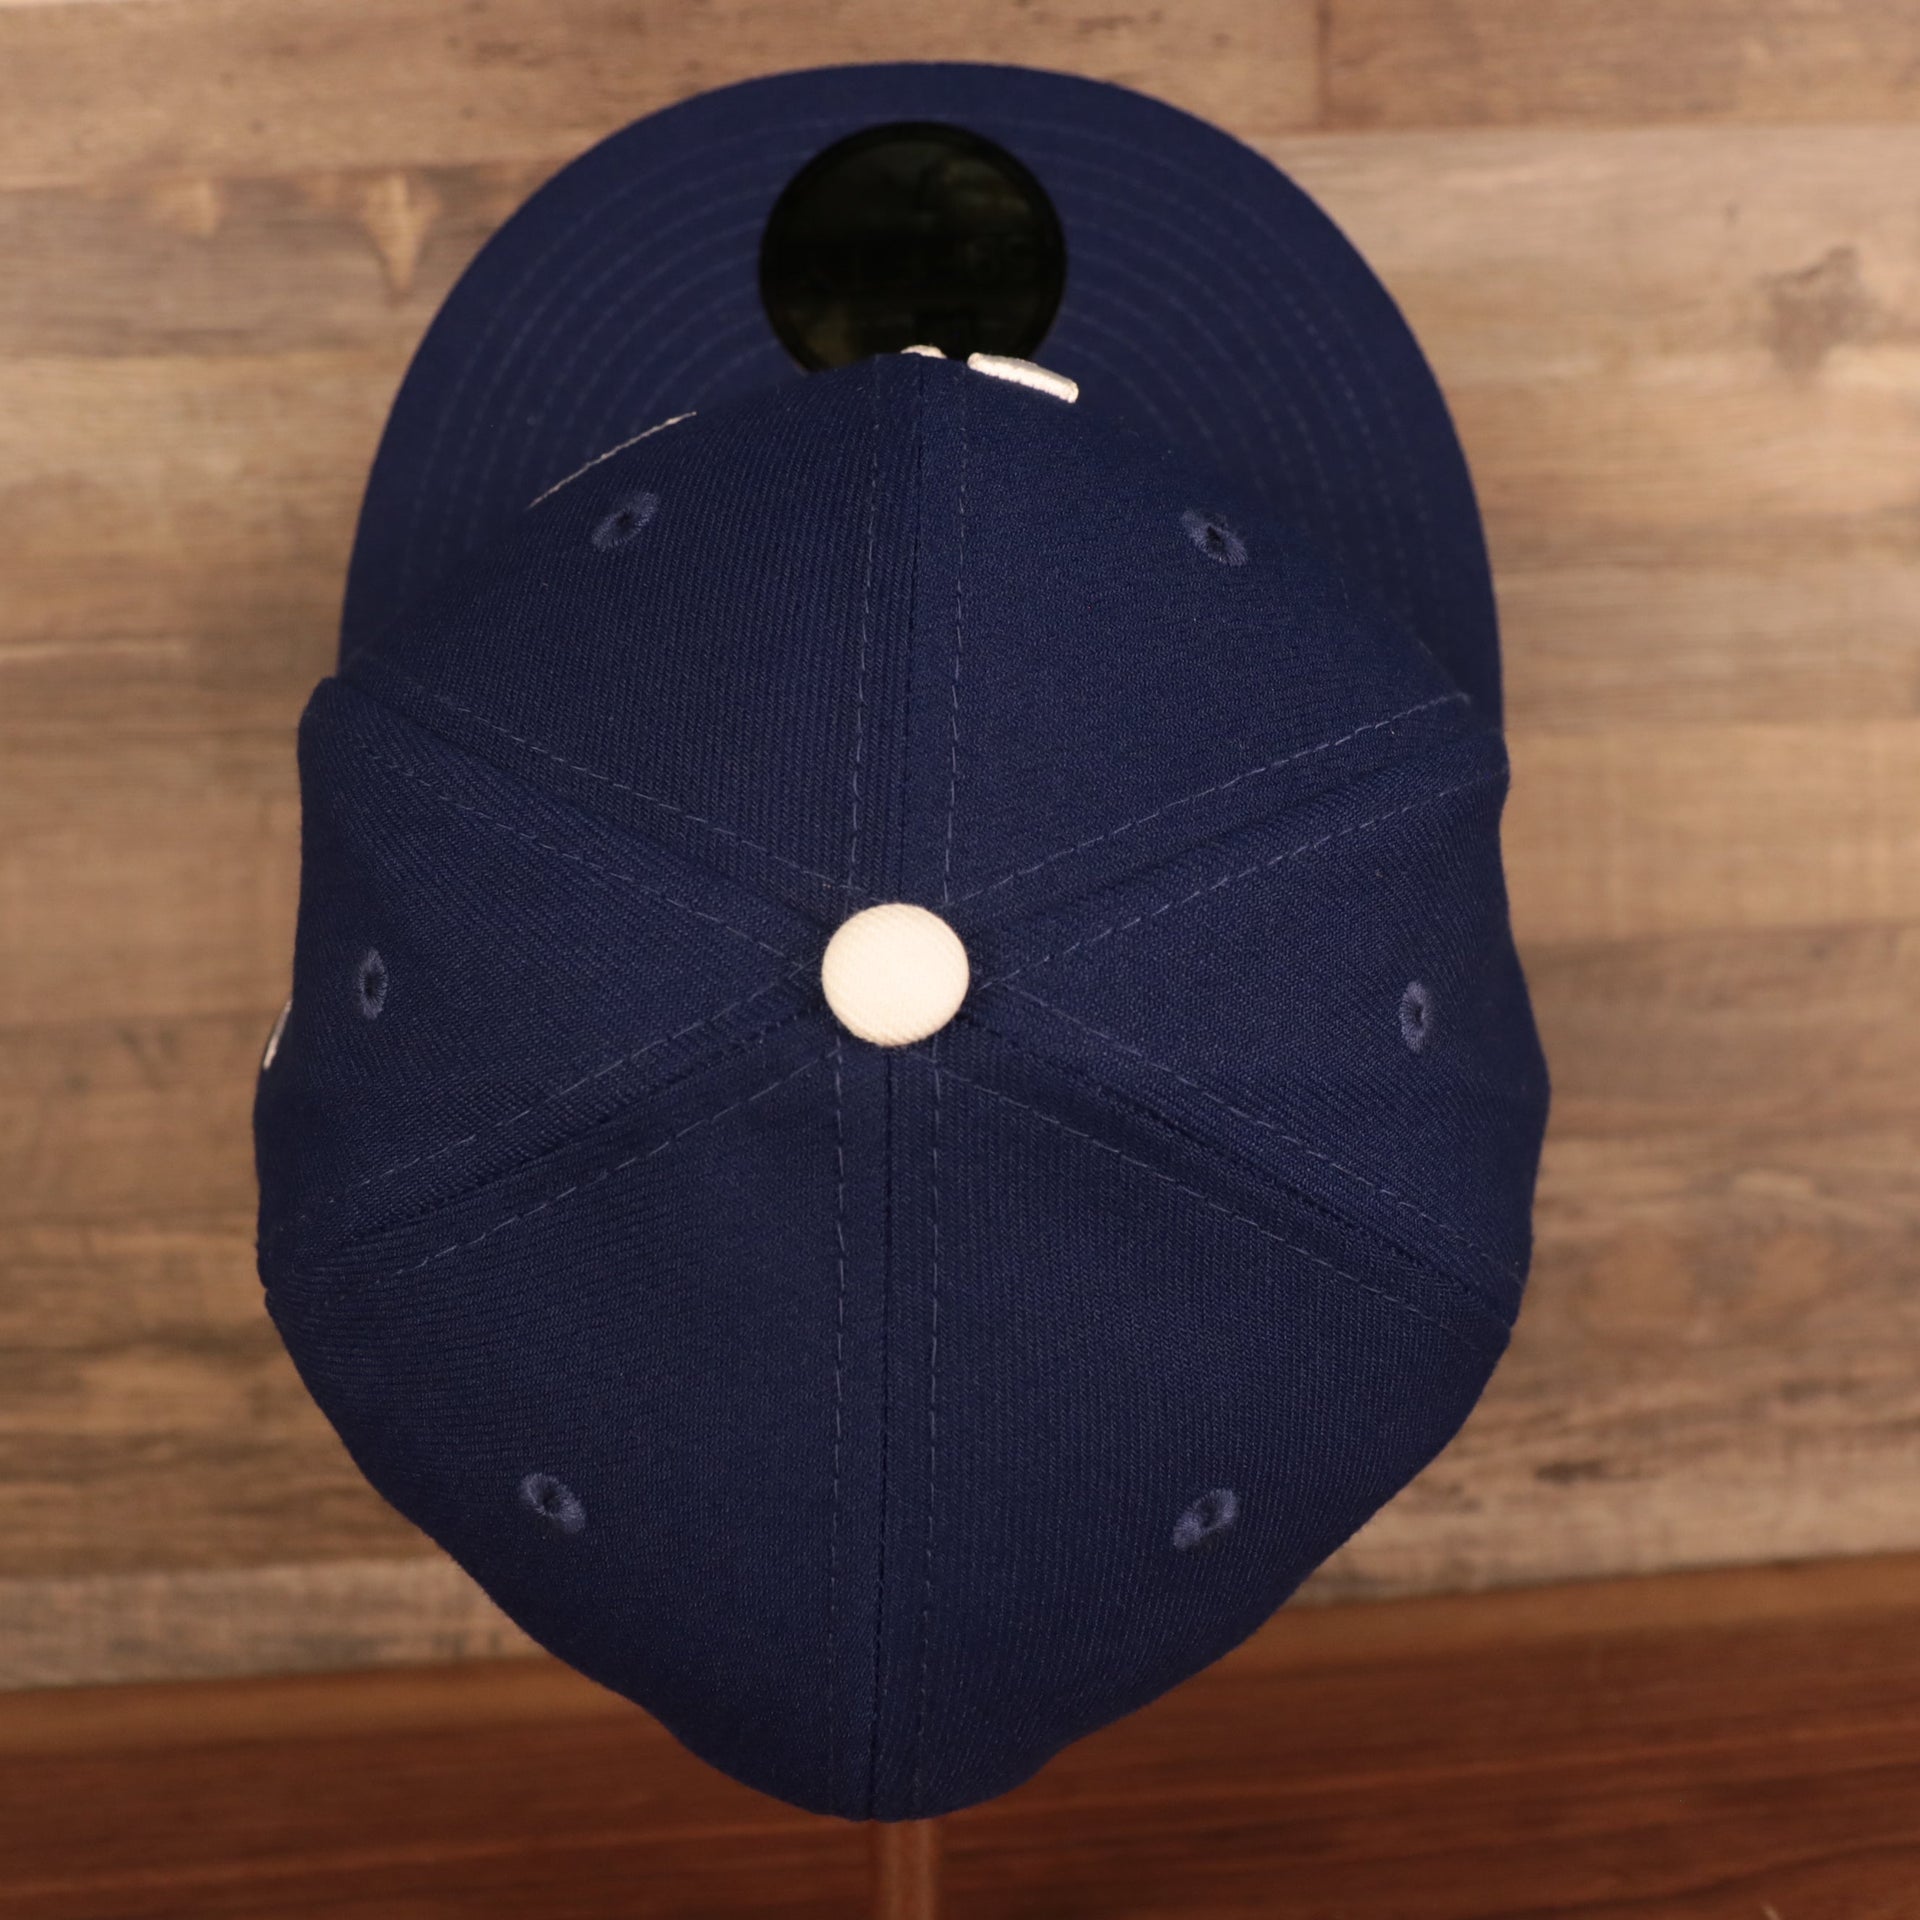 Top down view of the Los Angeles Dodger Multi-Color Paisley Bandana Under Brim 59Fifty Fitted Cap